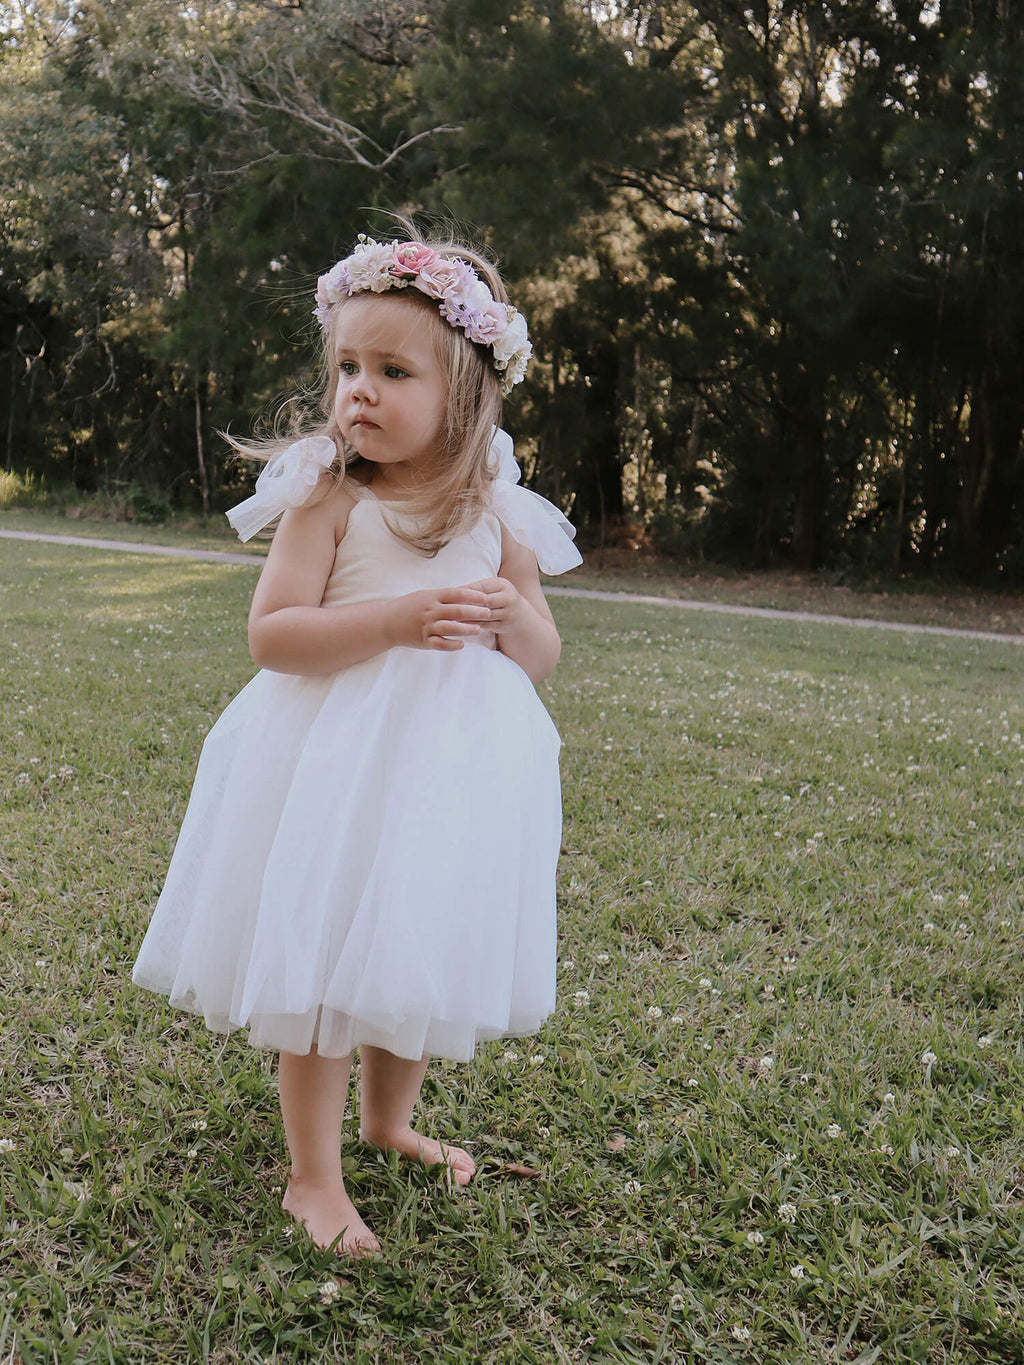 Harper tea length flower girl dress is worn by a young girl. She also wears our classic large tulle bow in her hair. The tulle tie straps are tied in bows at her shoulders.